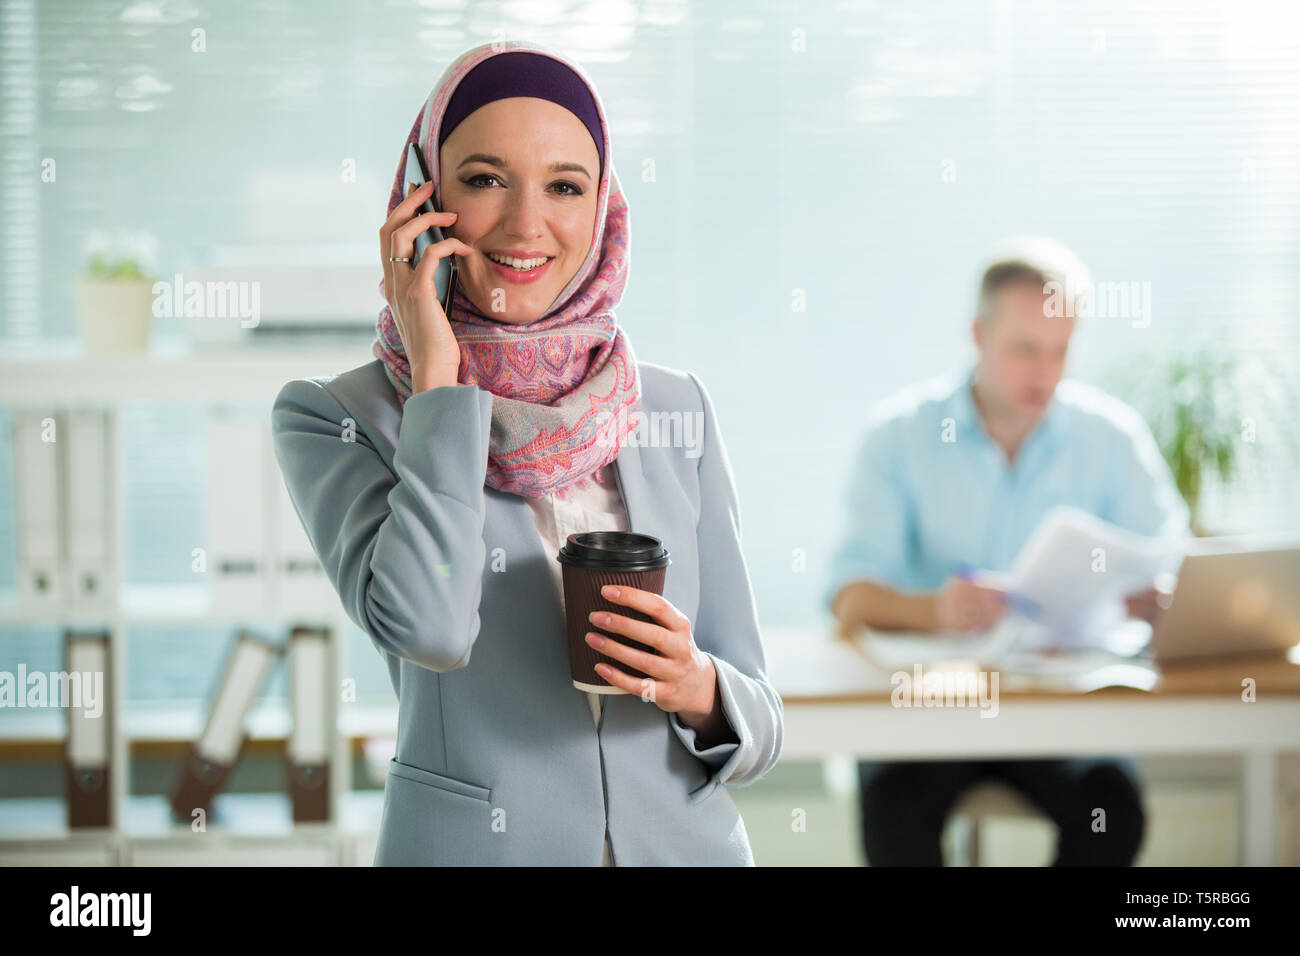 Beautiful woman in hijab and eyeglasses talking on phone, smiling, holding cup of coffee. Portrait of confident muslim businesswoman. Modern office Stock Photo